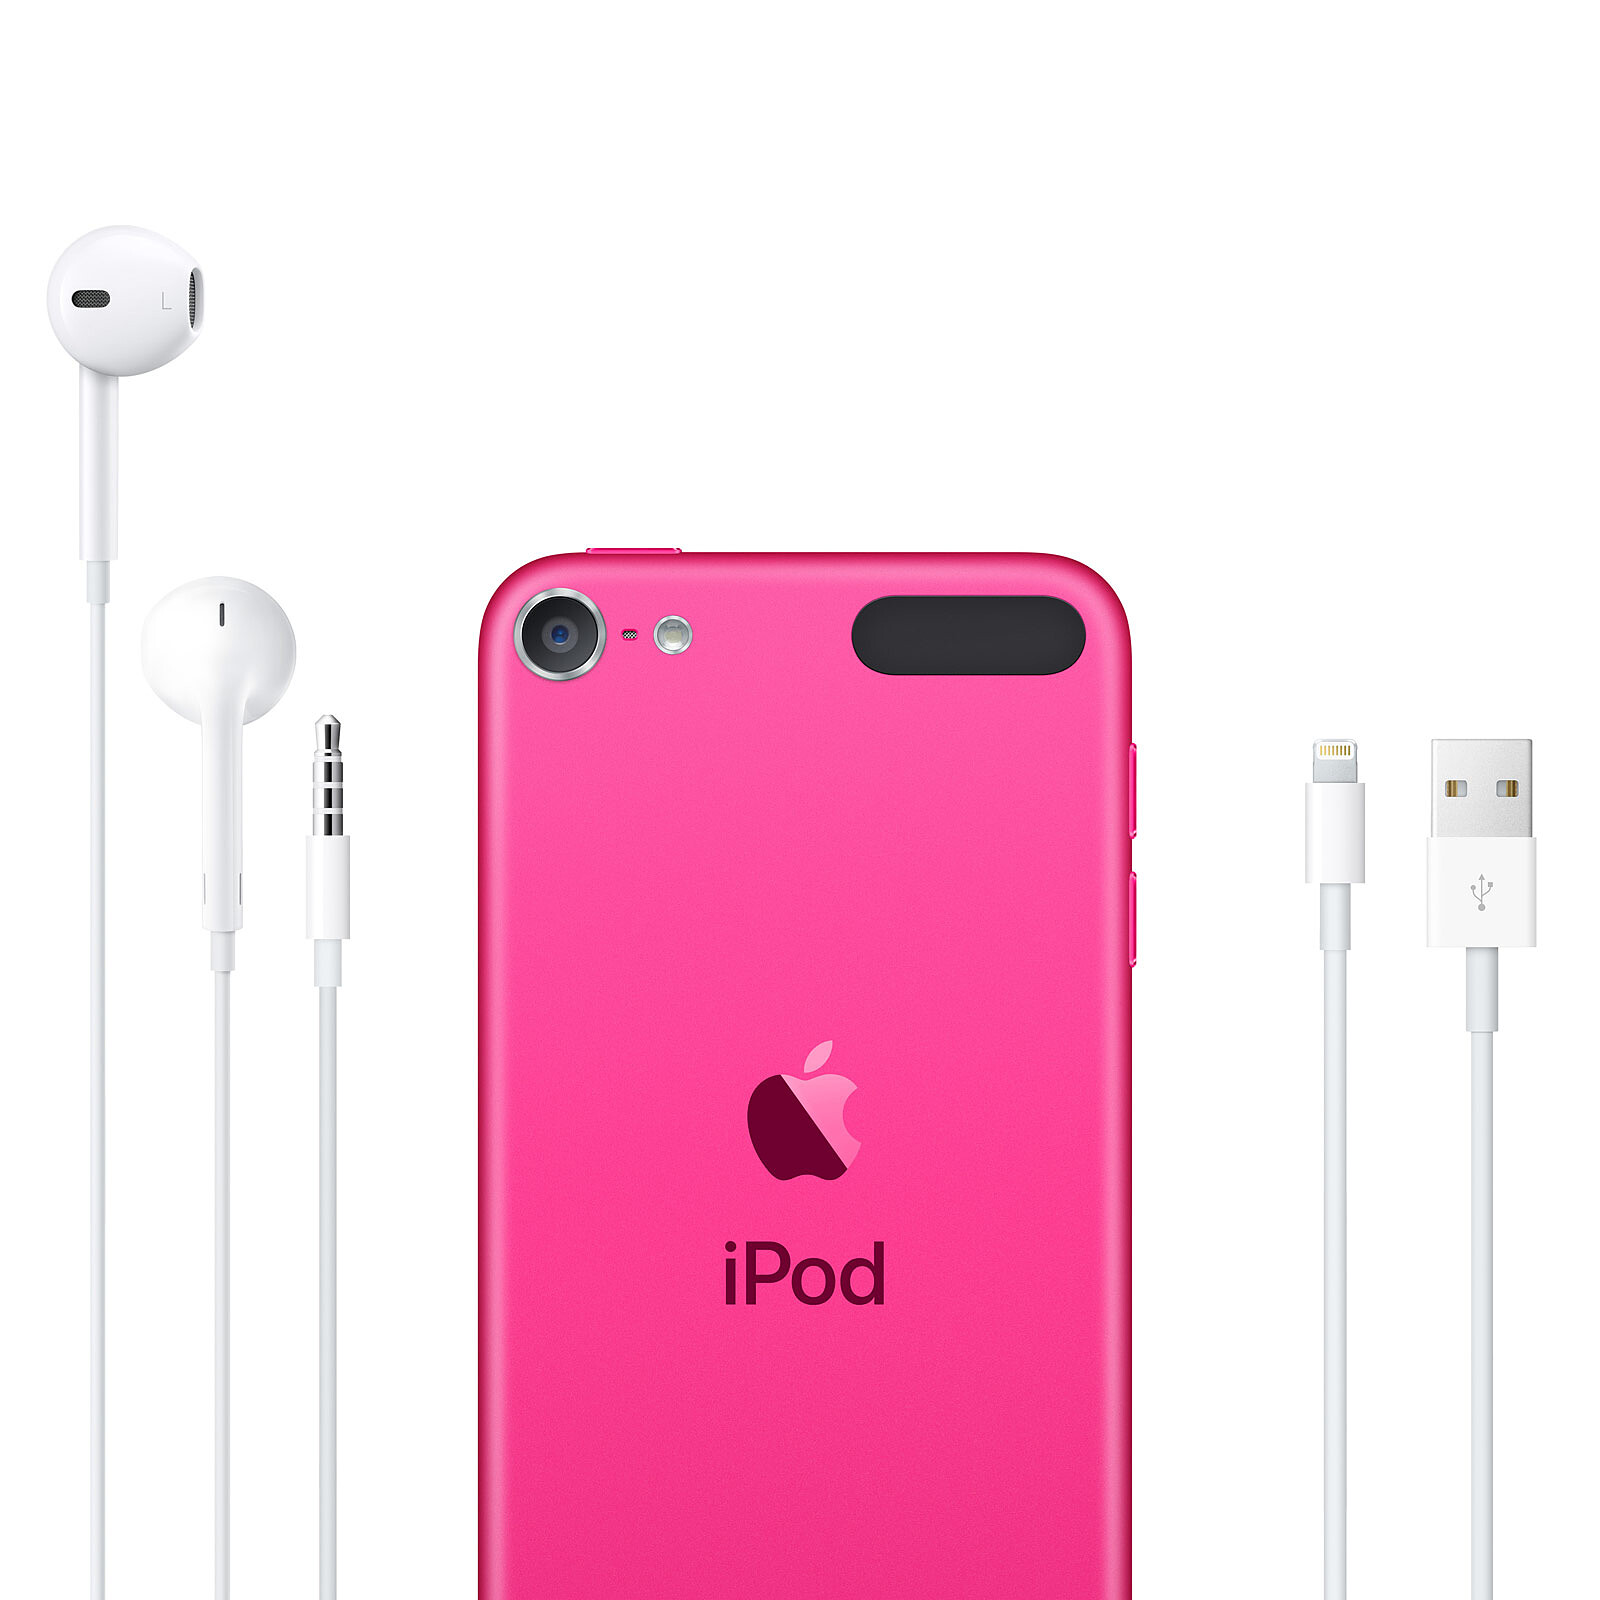 Apple iPod touch   GB Pink   MP3 player & iPod   LDLC 3